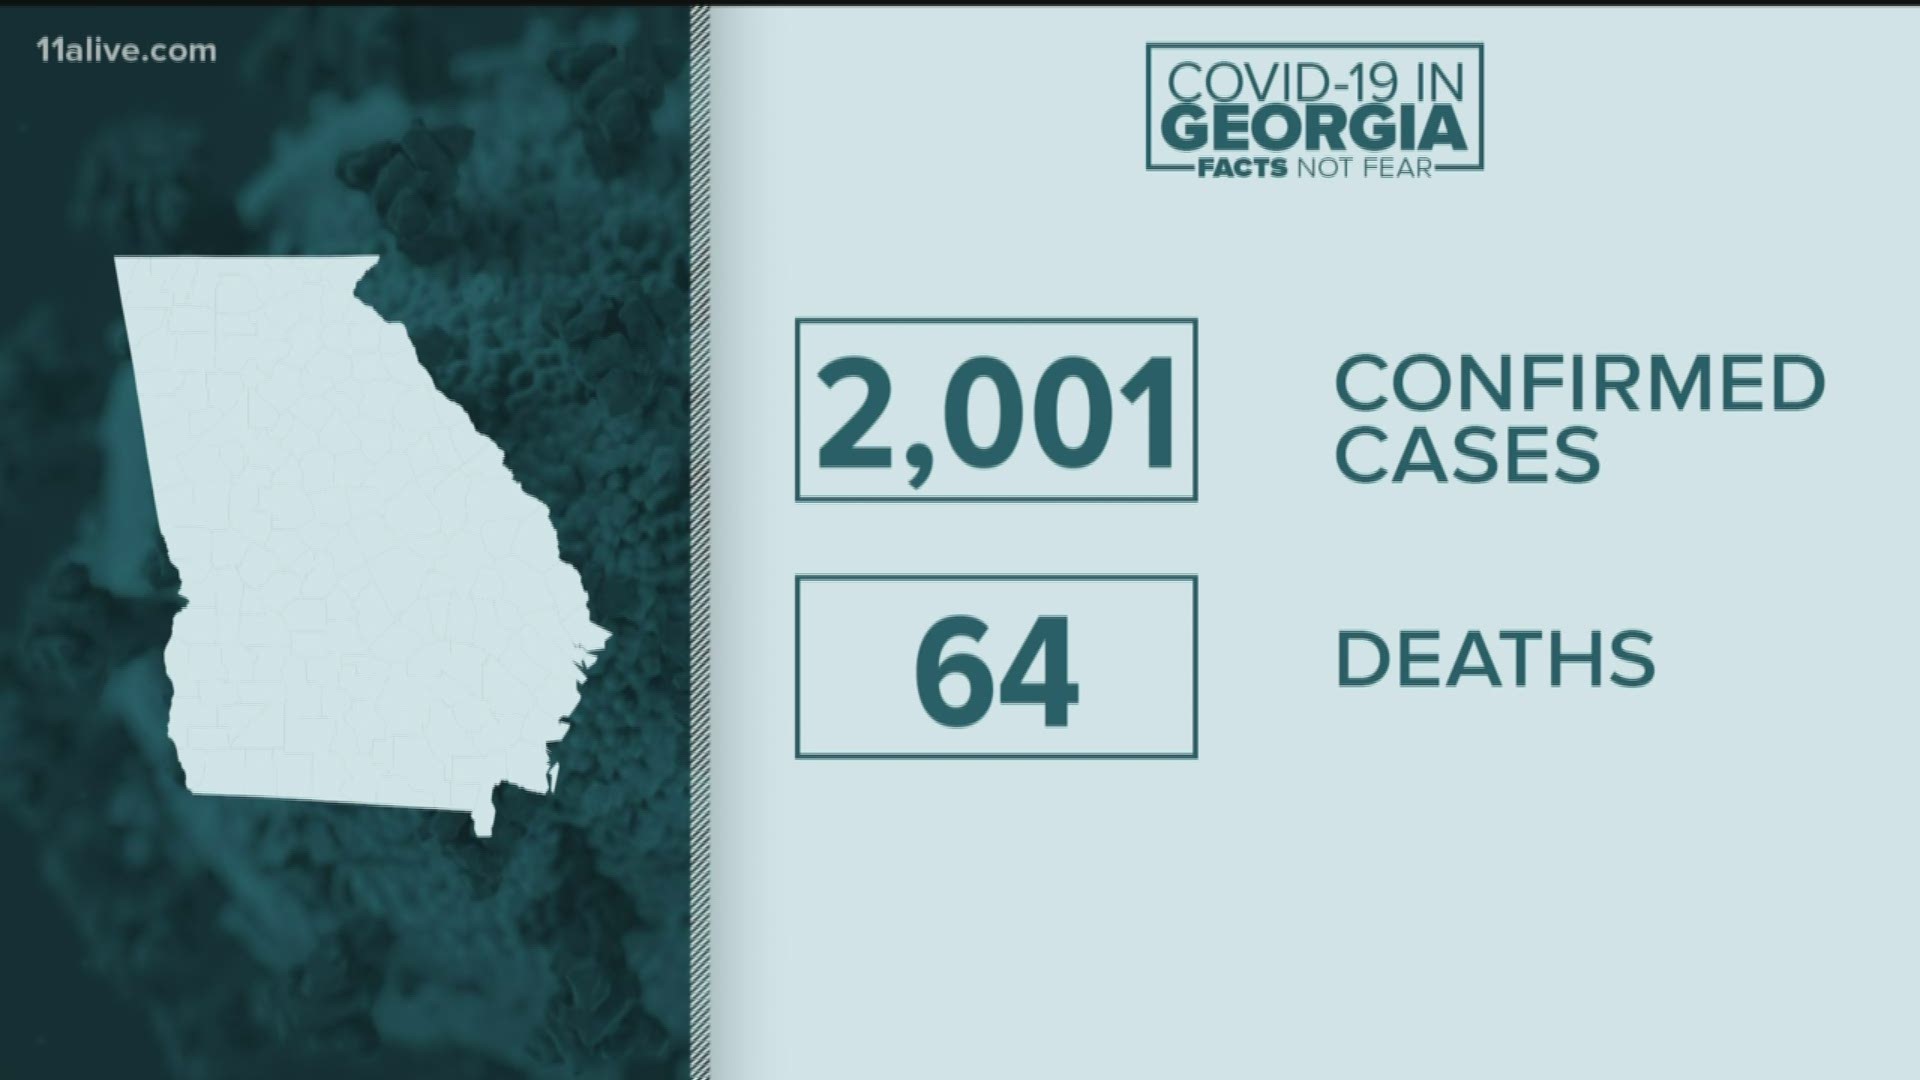 As of noon on March 27, there are 2001 confirmed cases of COVID-19 in Georgia.